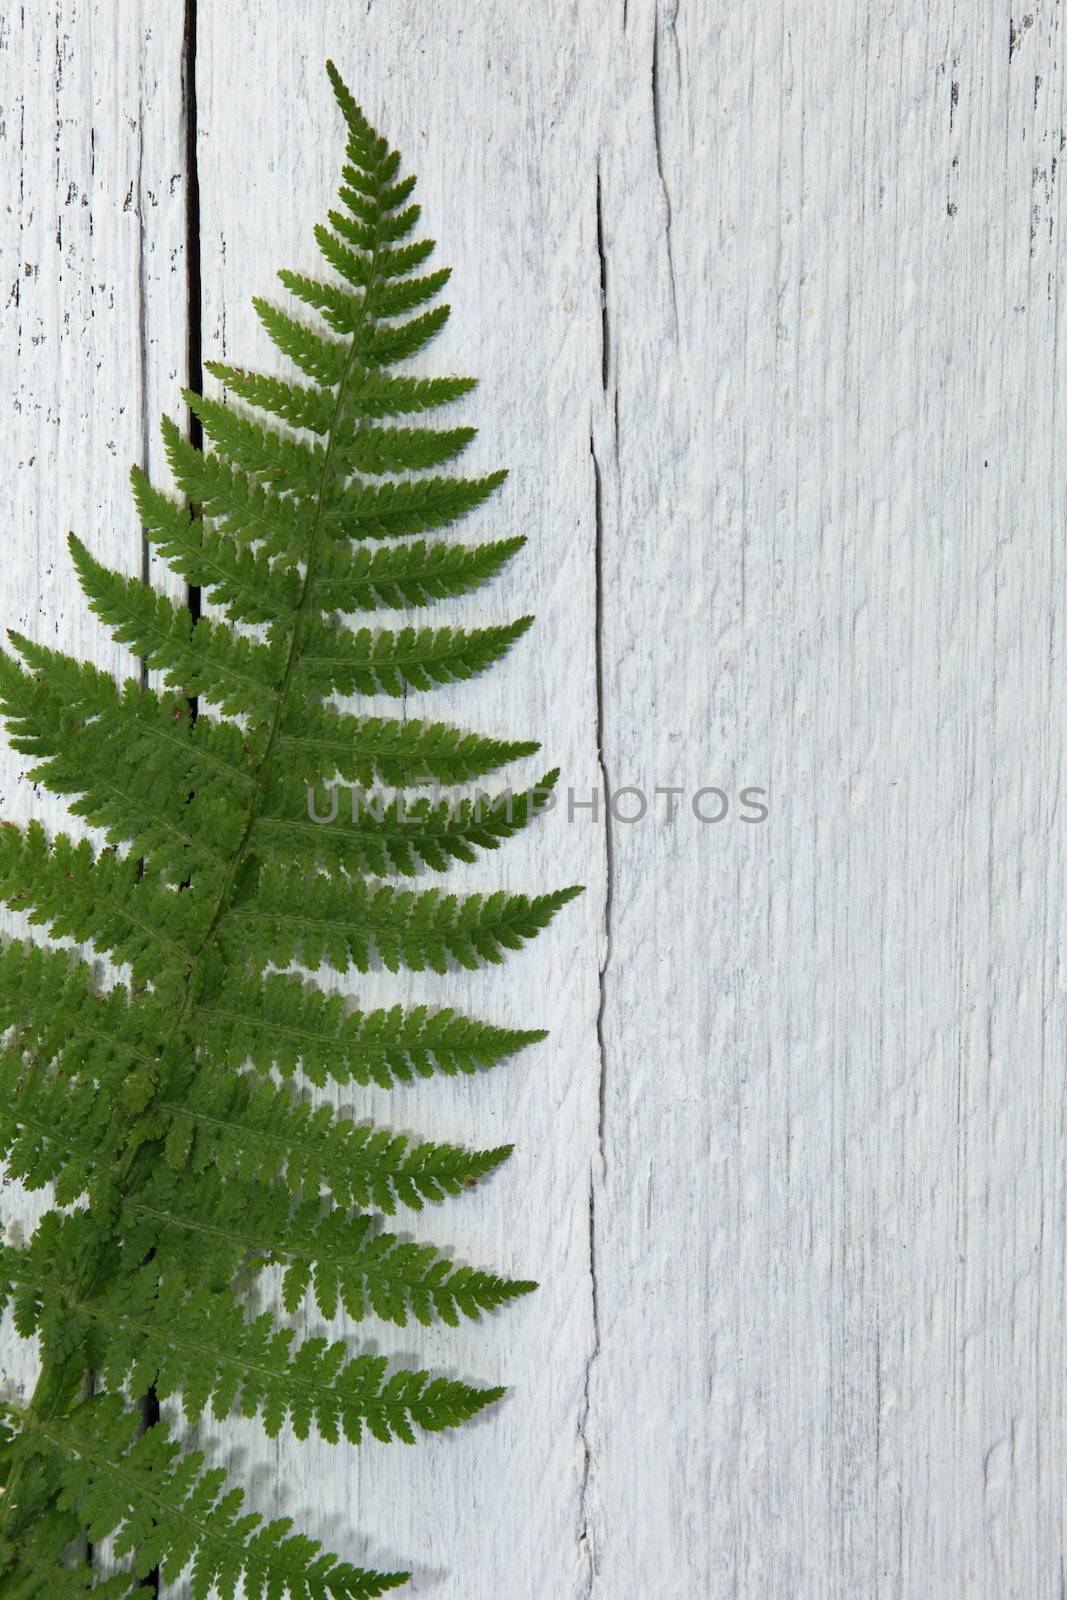 Overhead view of a fresh green fern leaf lying on textured white painted wooden planks with cracks and copyspace for your text